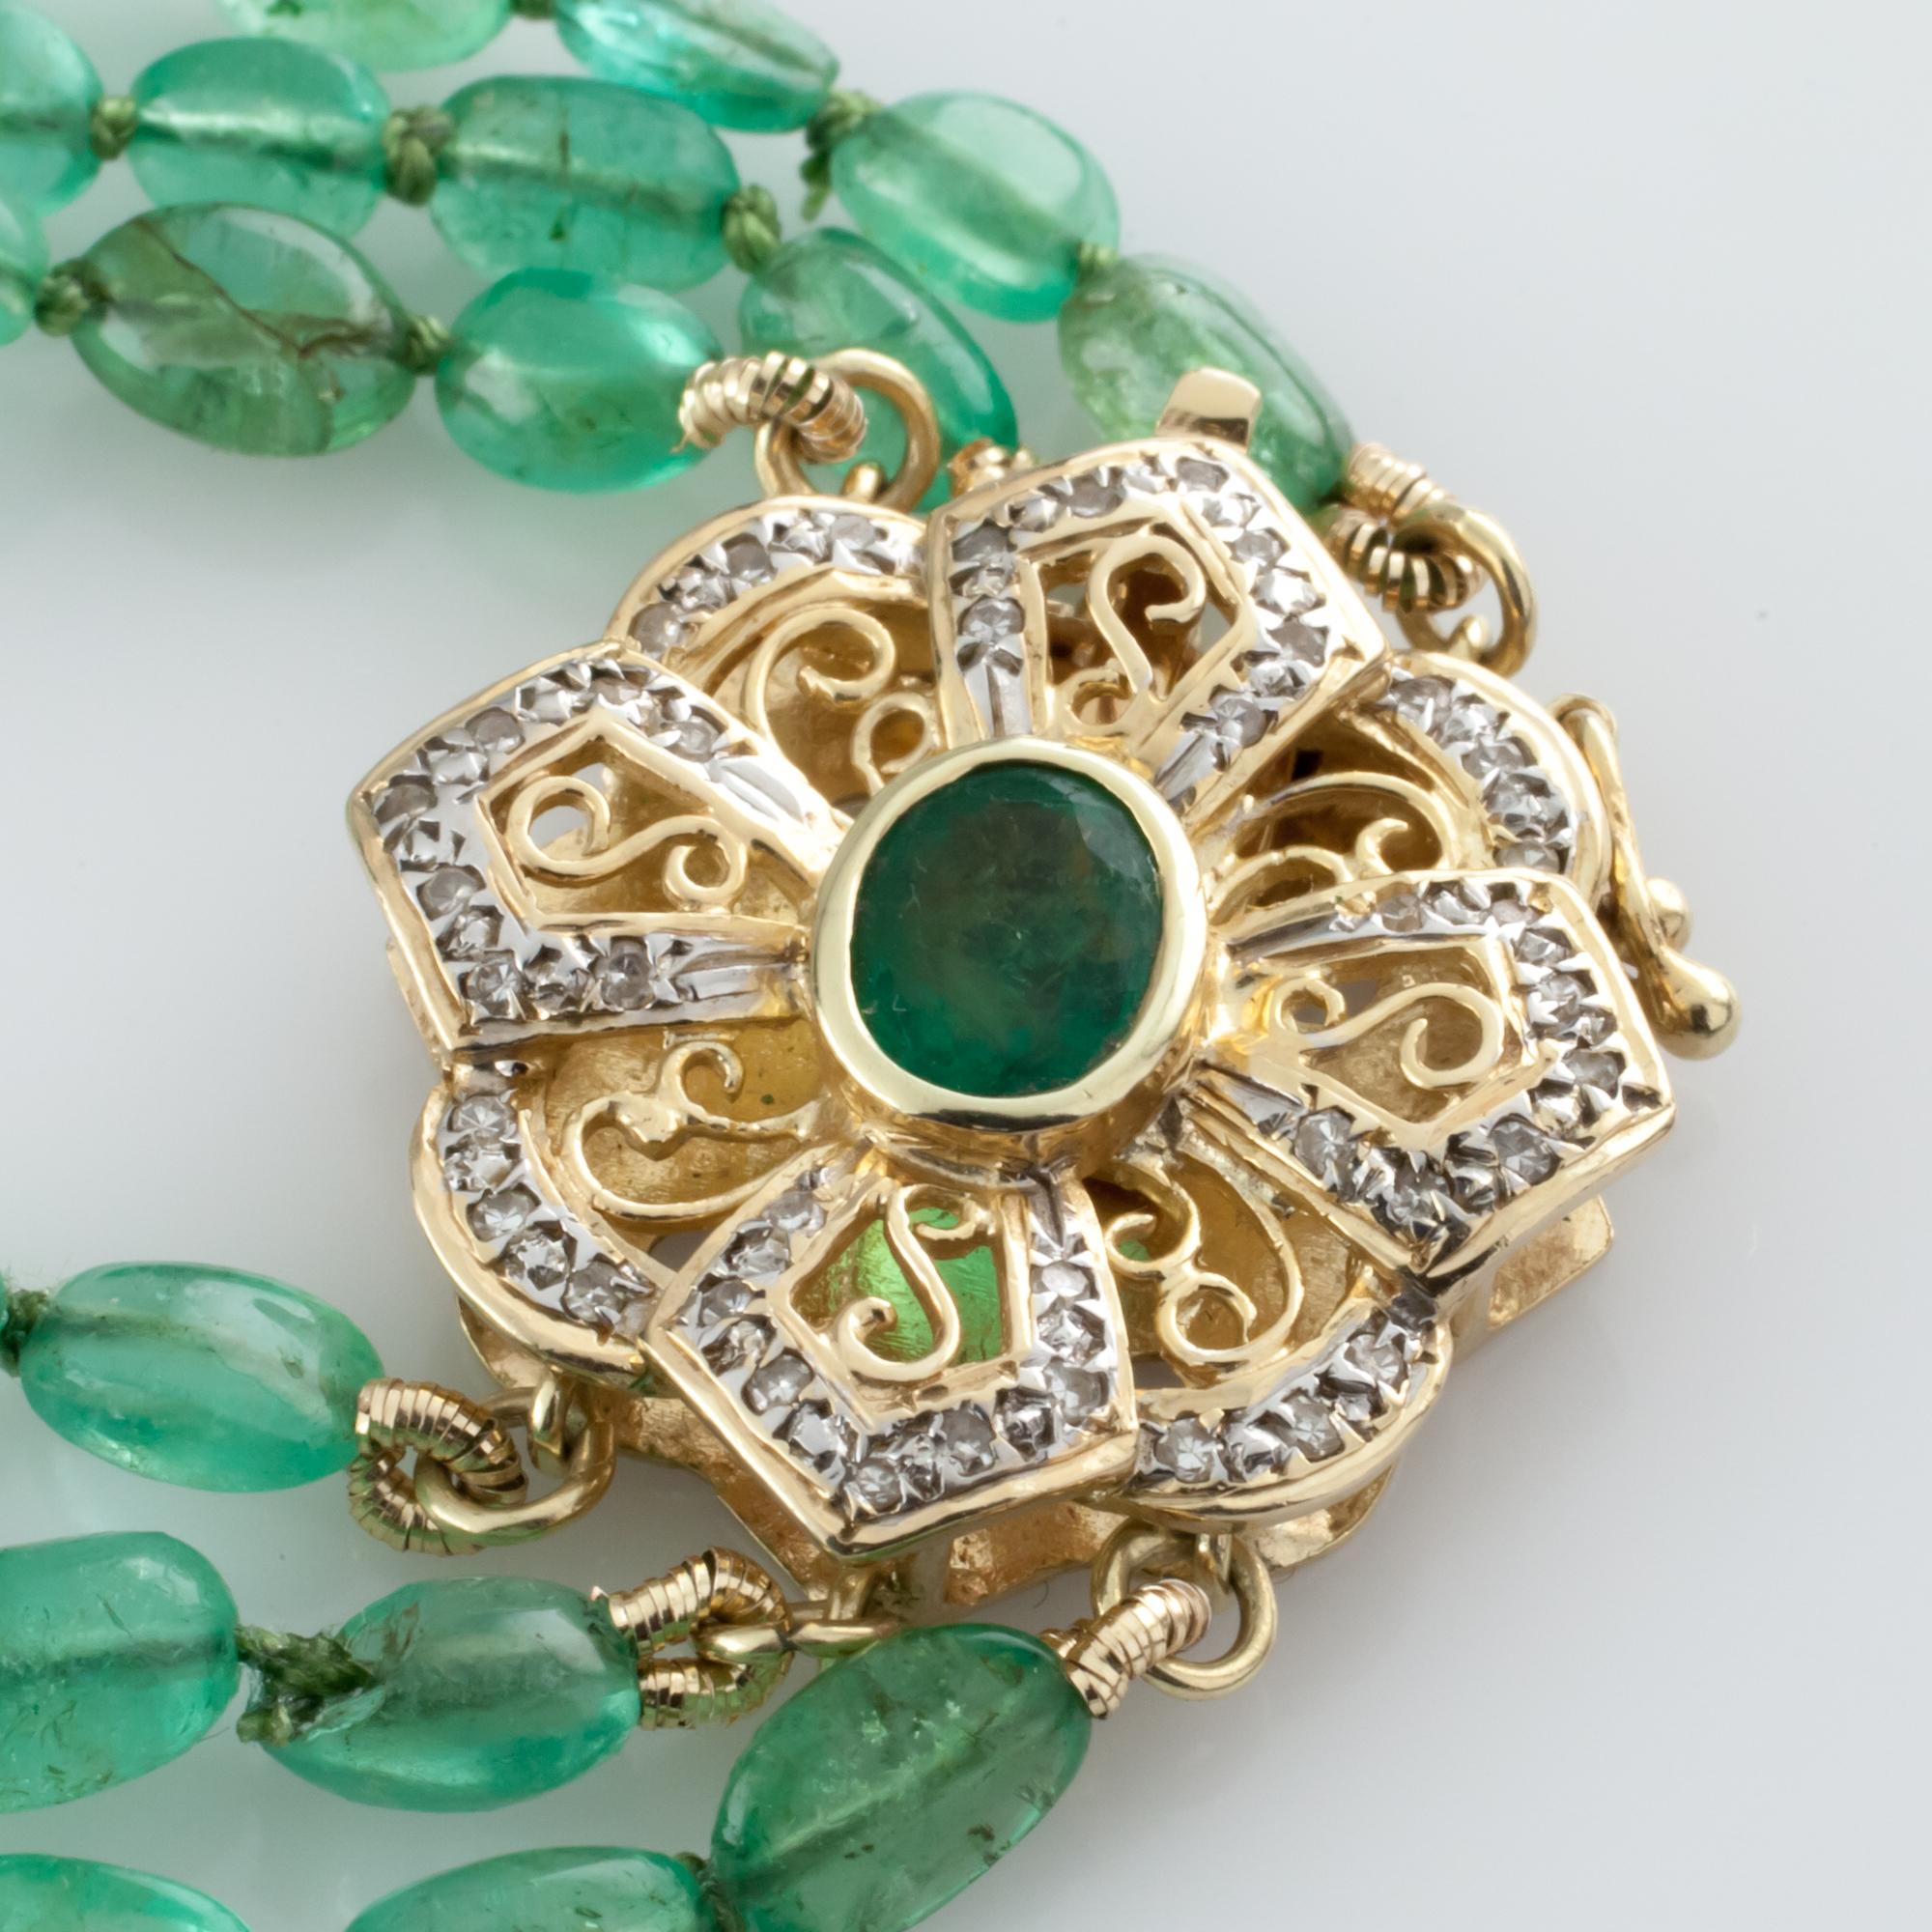 Polished Emerald 400 Carat Three-Strand Necklace with Diamond 14k Gold Clasp In Excellent Condition For Sale In Sherman Oaks, CA